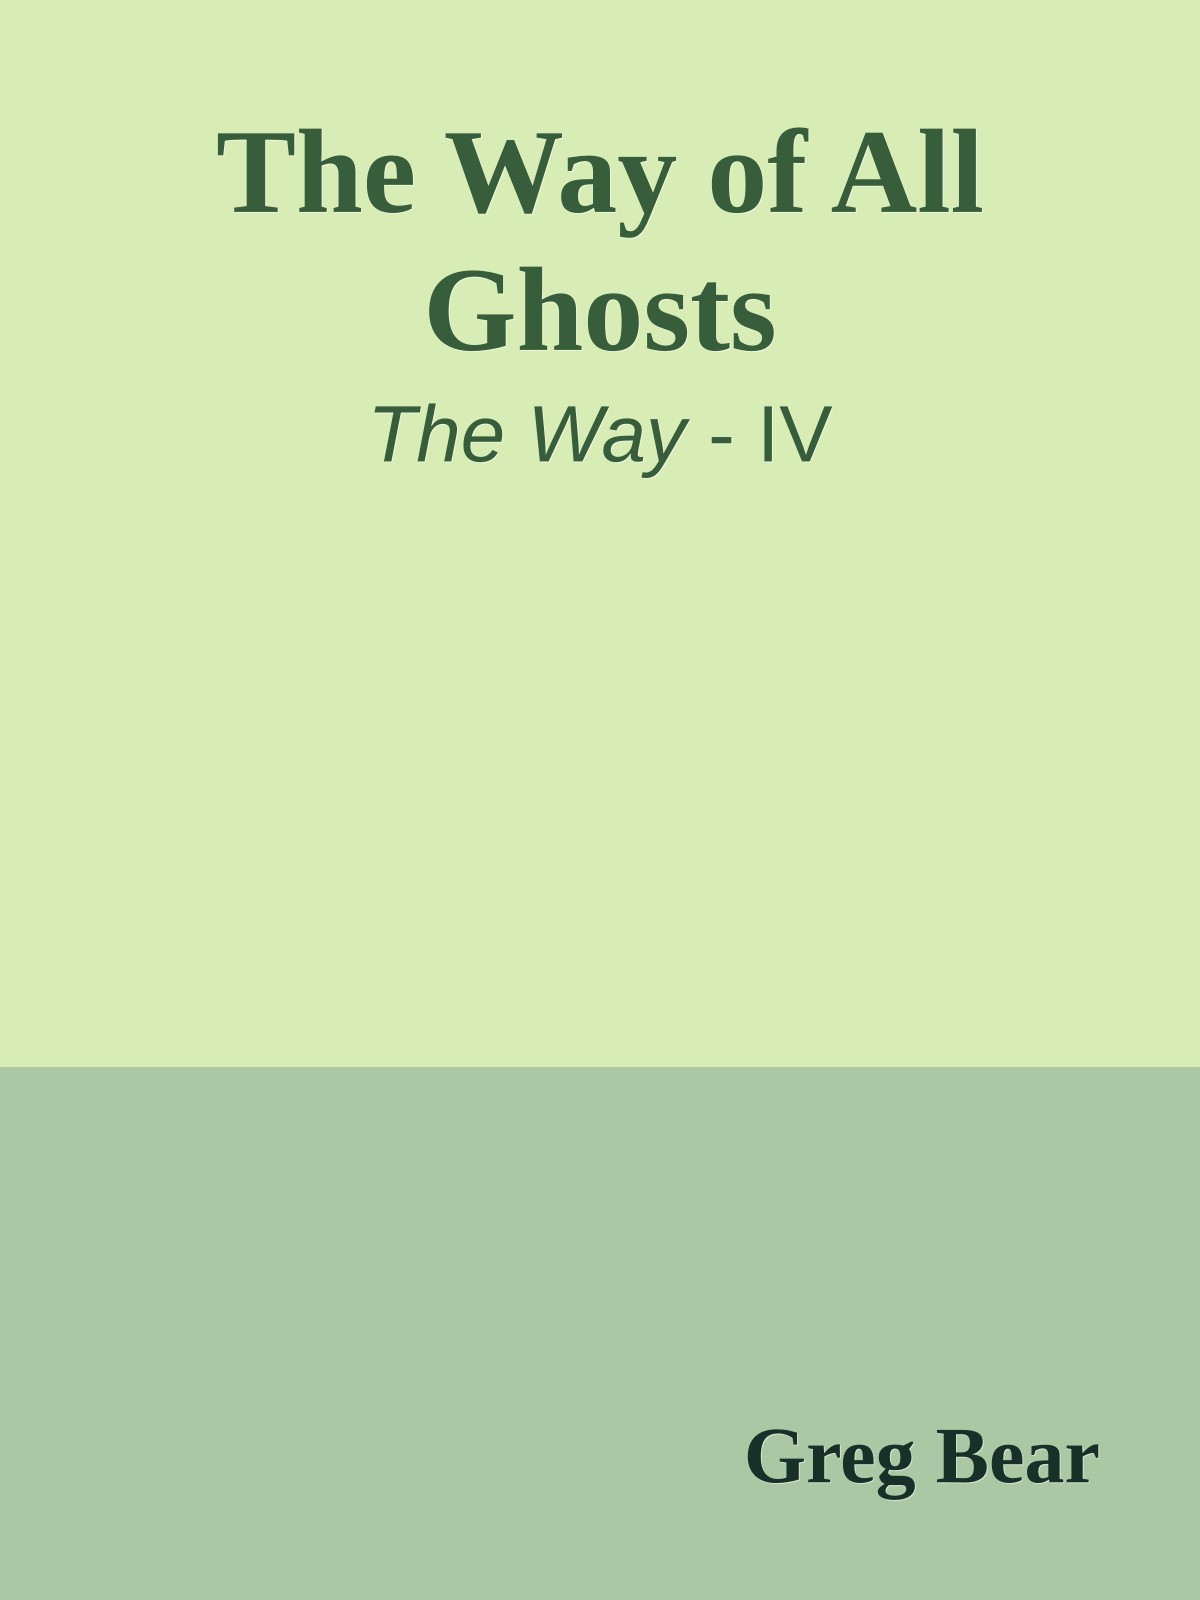 The Way of All Ghosts